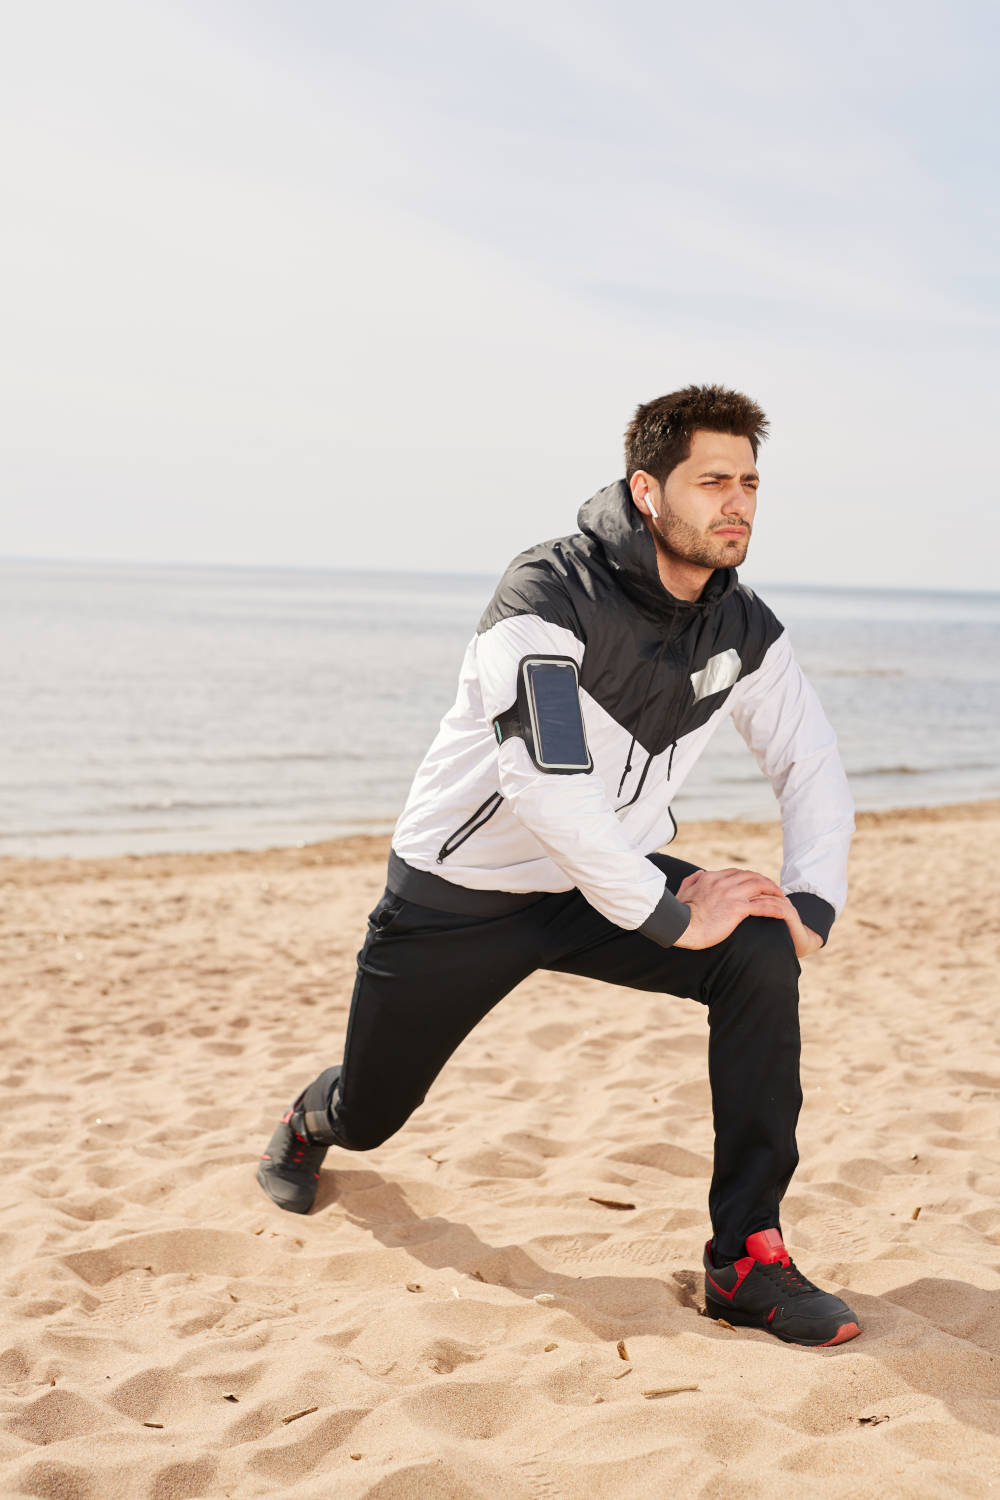 Young sportsman with airpods and smartphone exercising on sandy beach with waterside on background